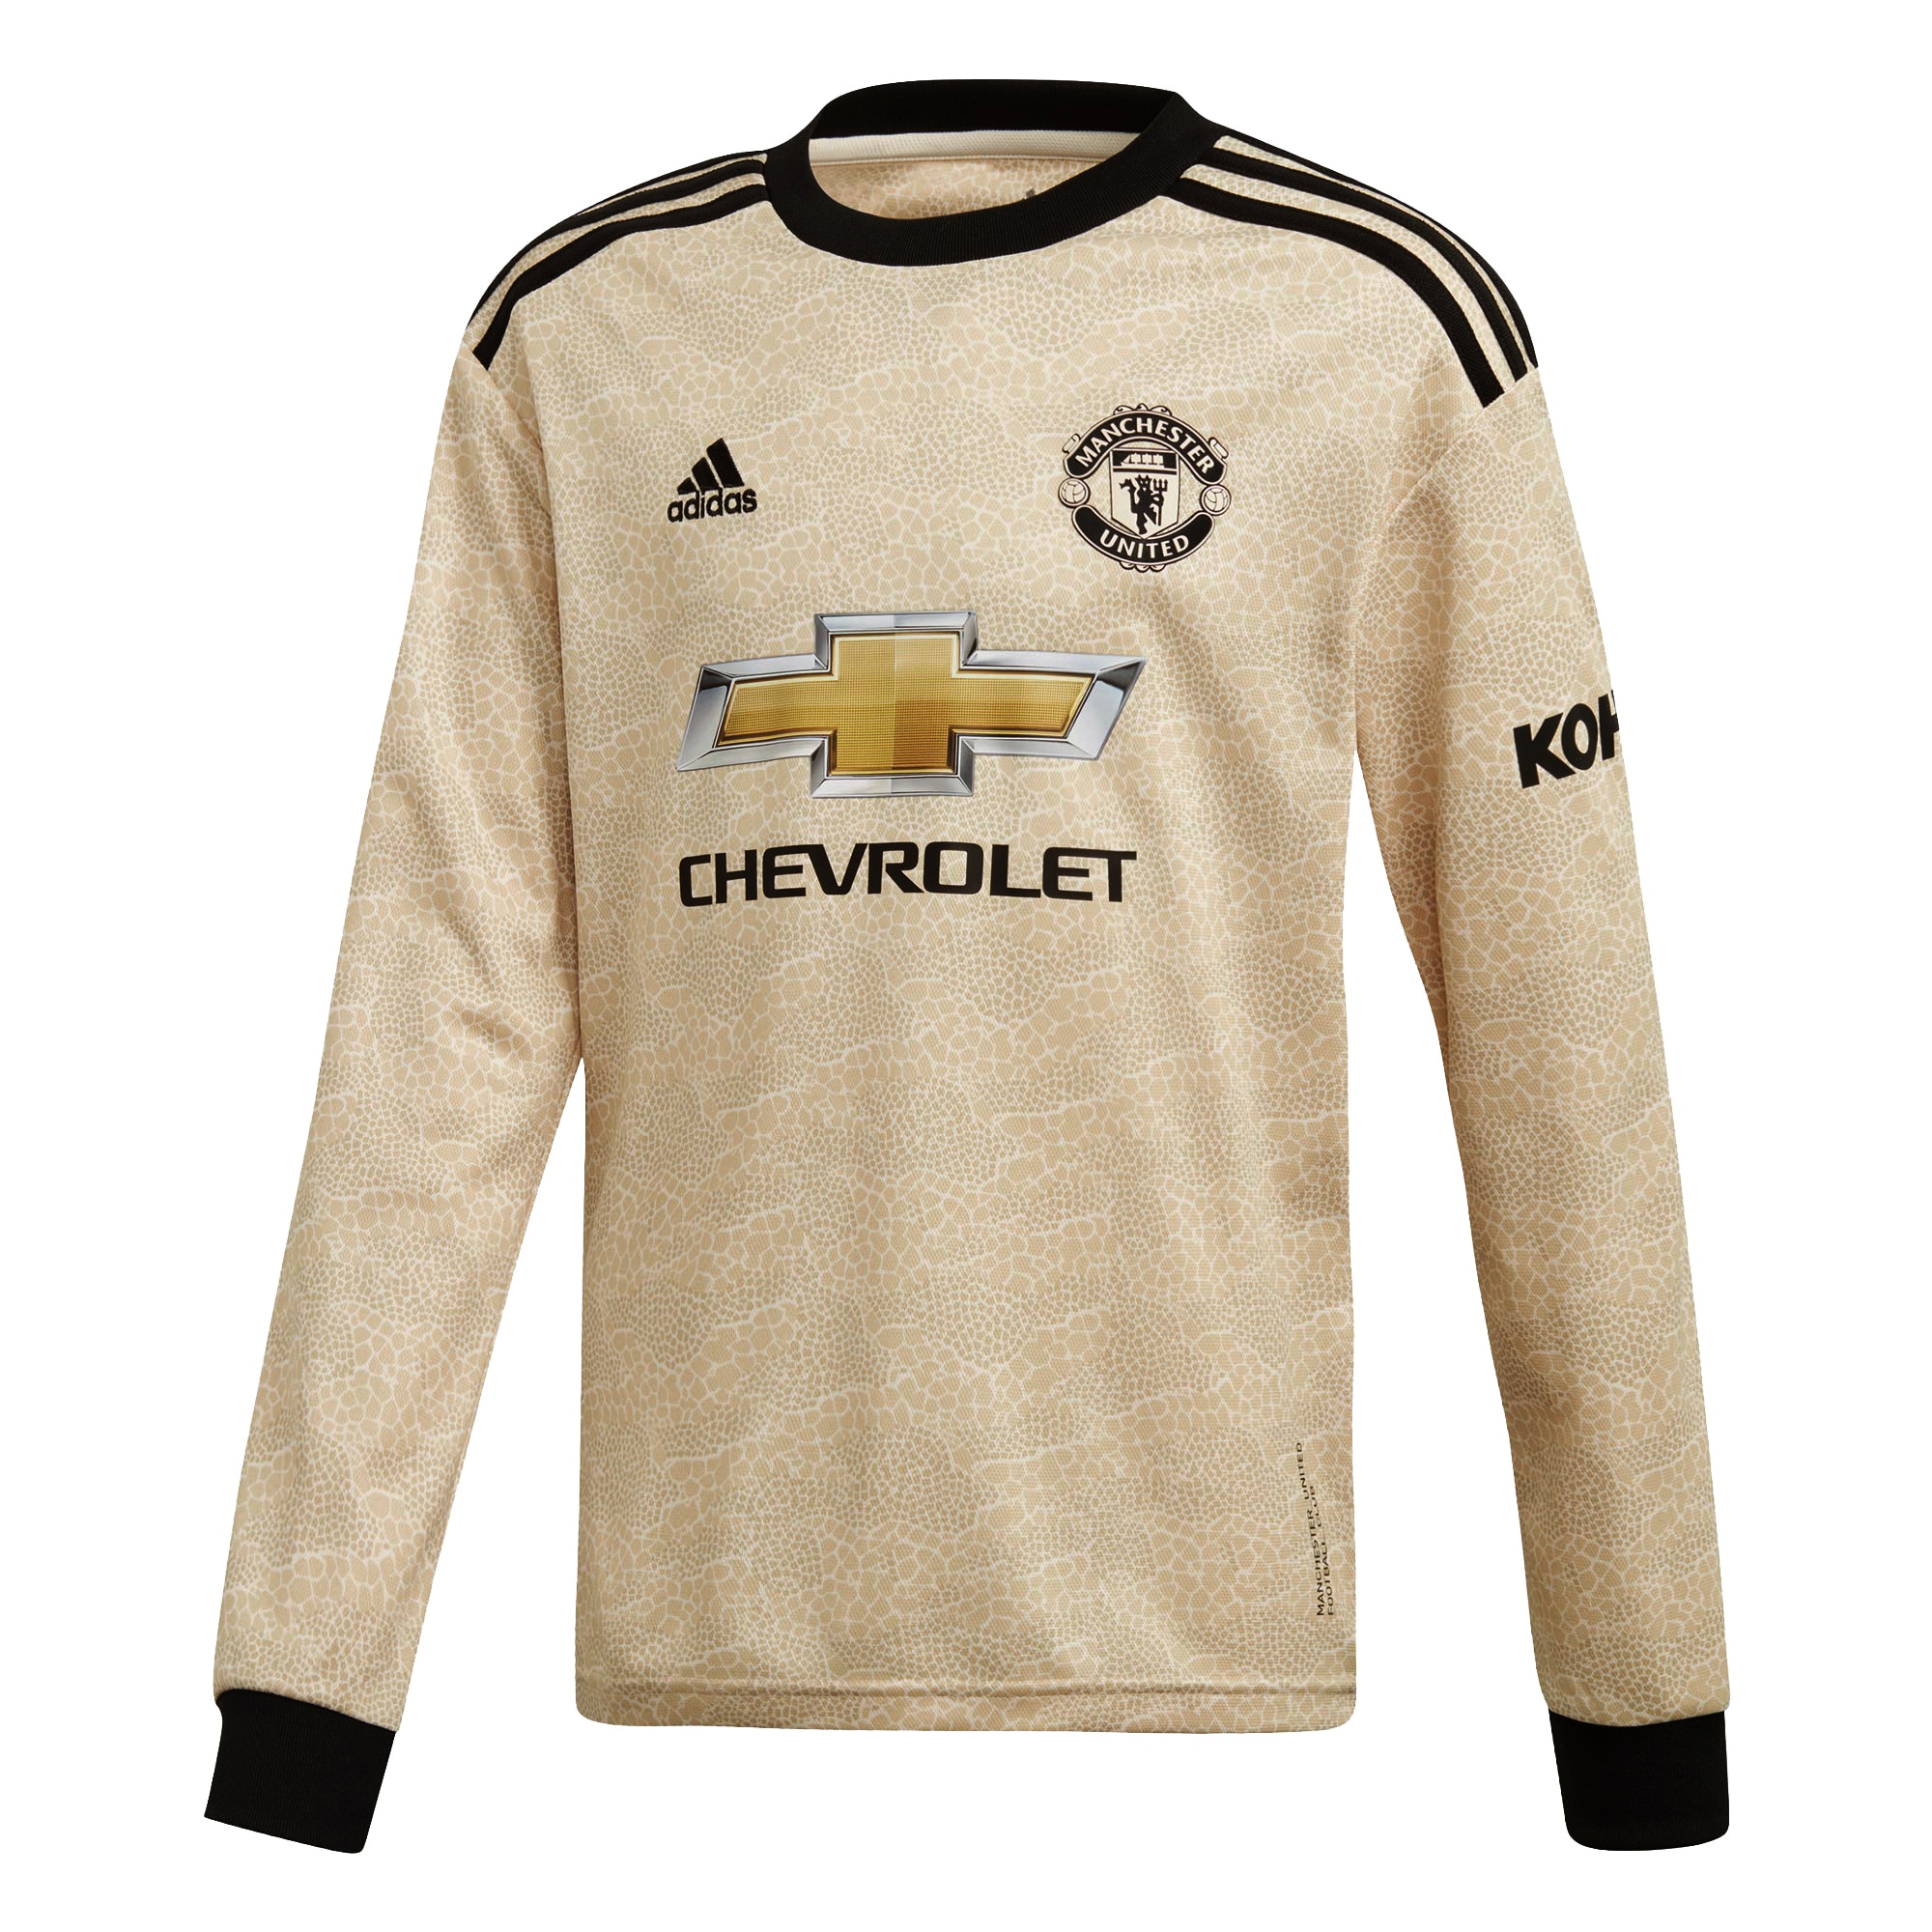 manchester united long sleeve away jersey